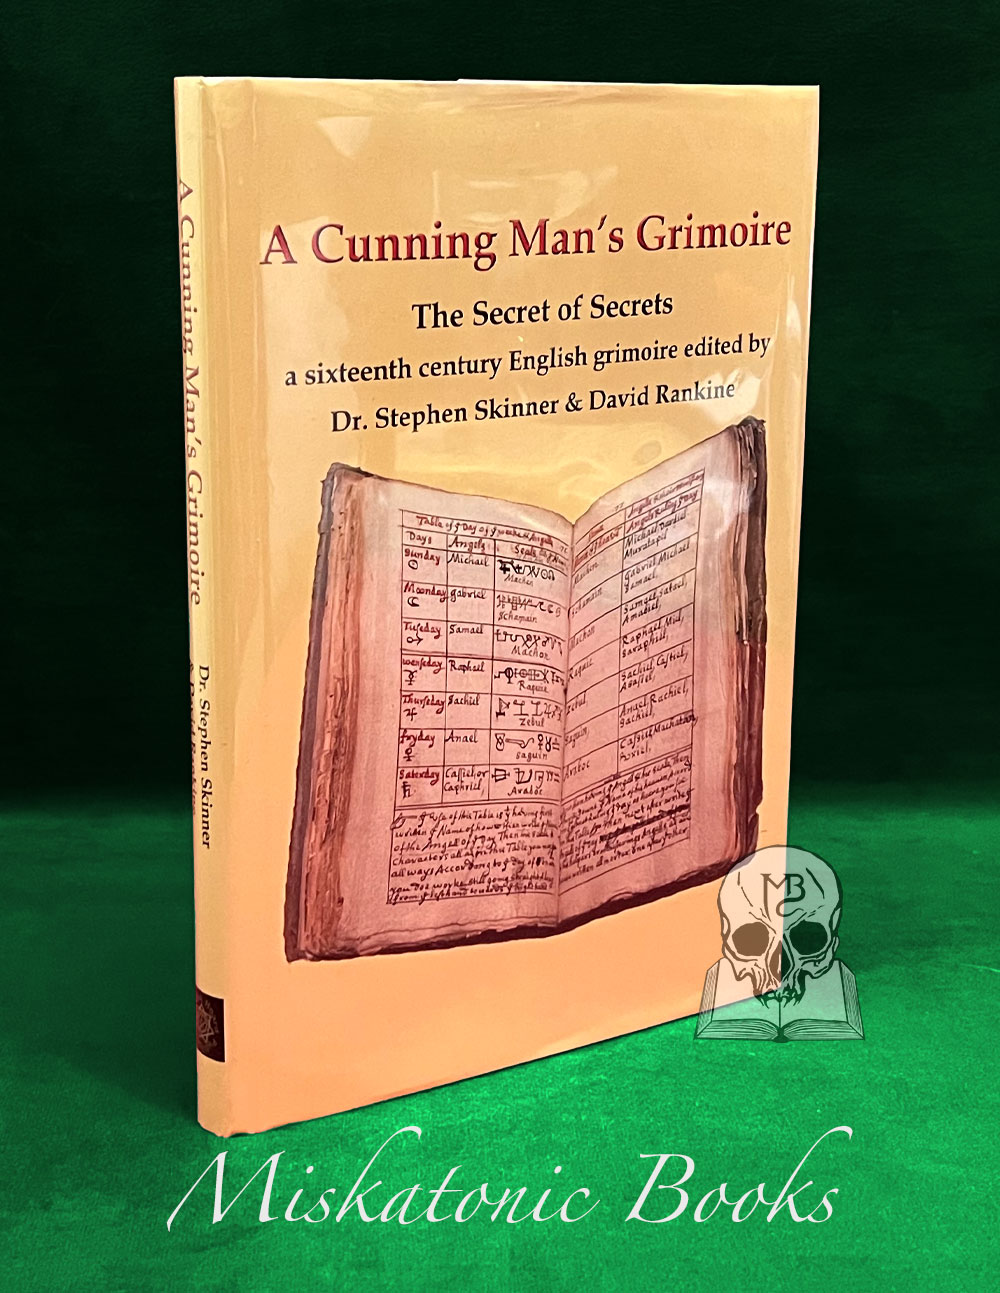 A Cunning Man's Grimoire by Dr Stephen Skinner & David Rankine - Hardcover